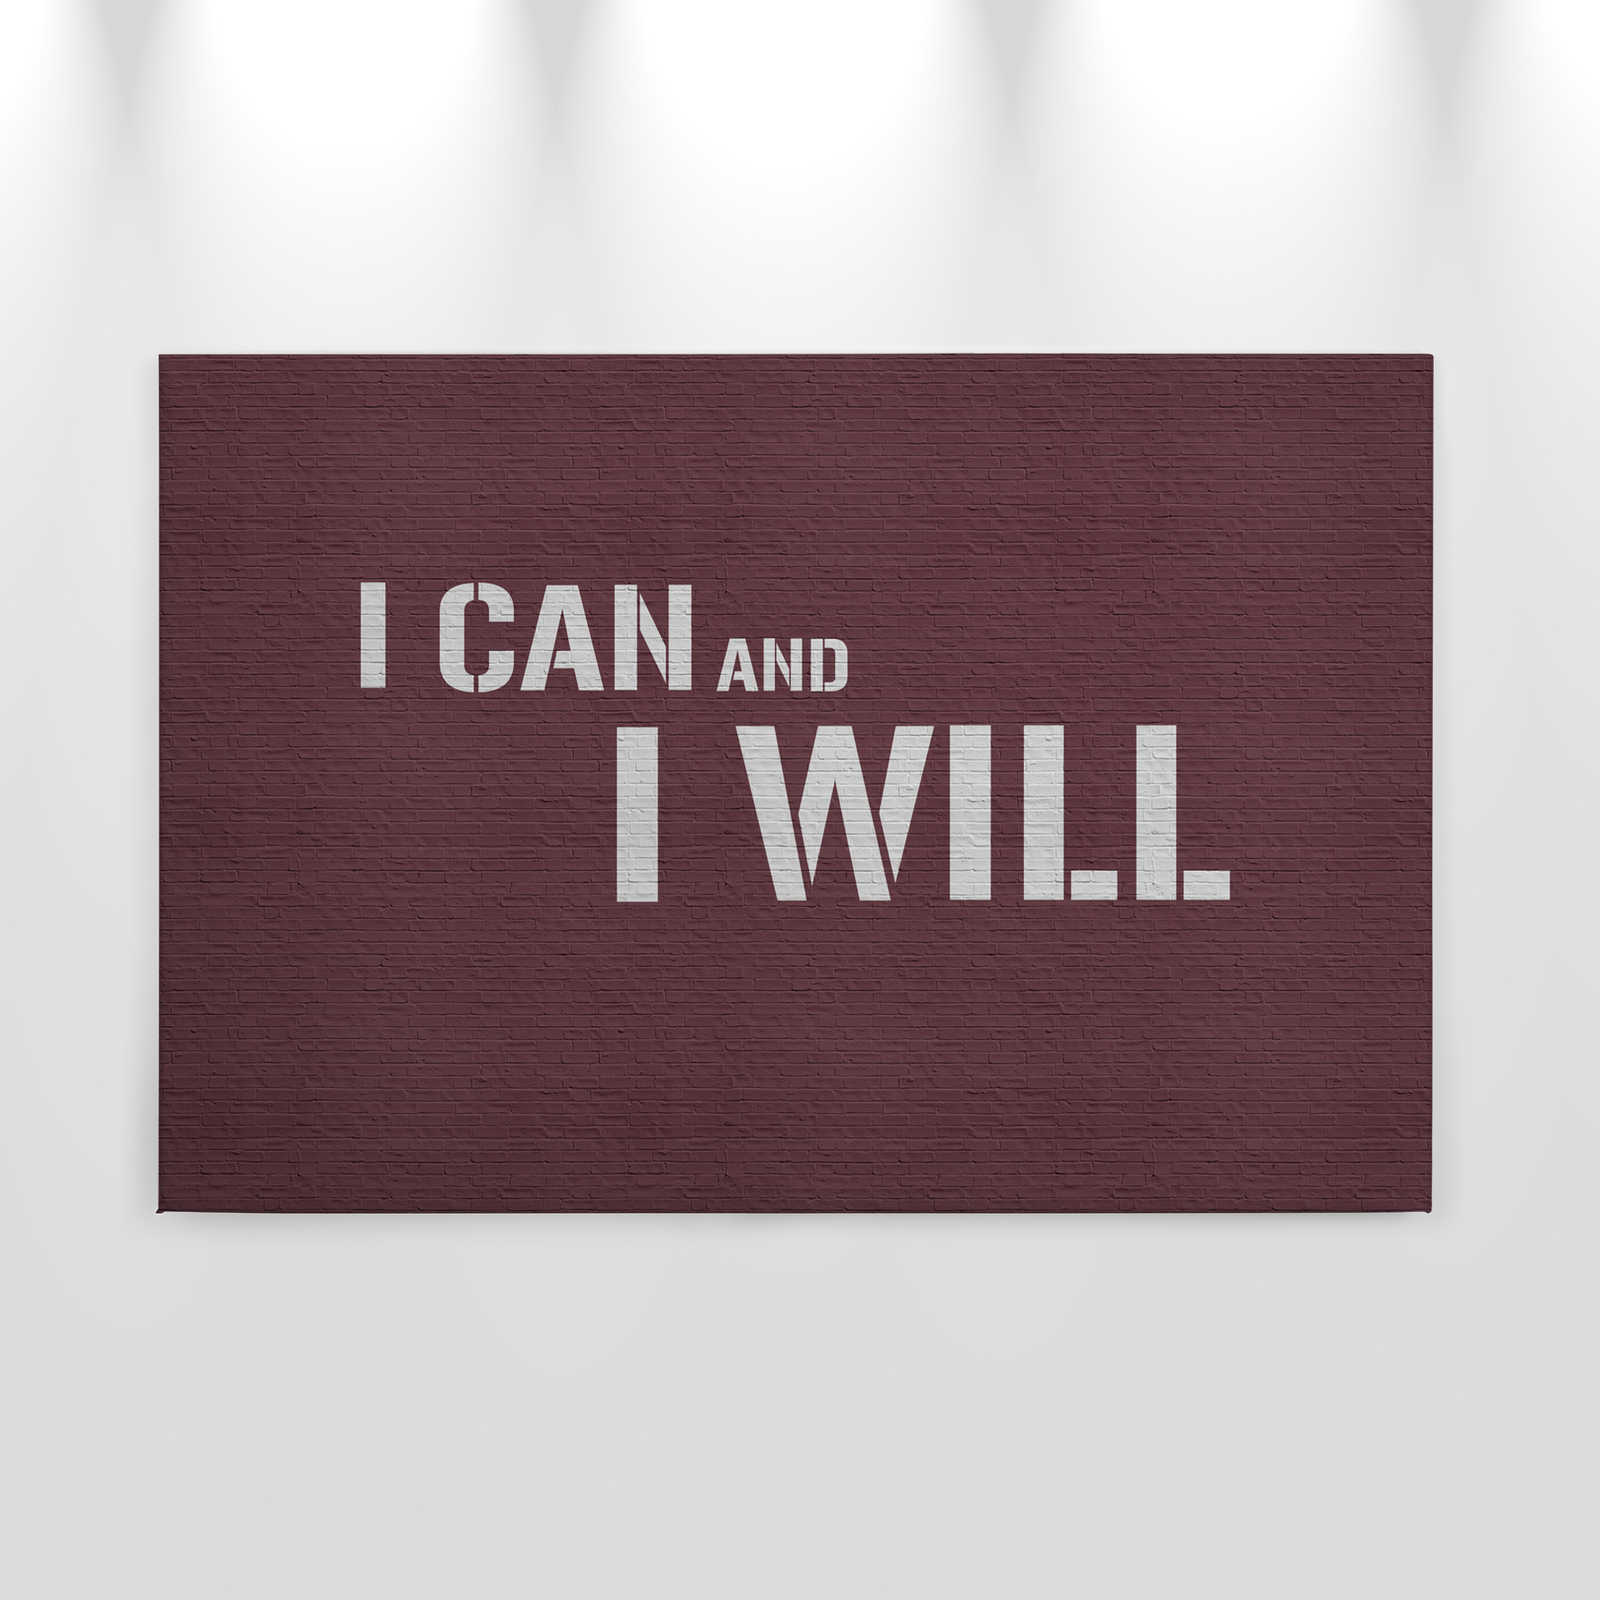             Message 3 - Canvas painting Red brick wall with motivational saying - 0,90 m x 0,60 m
        